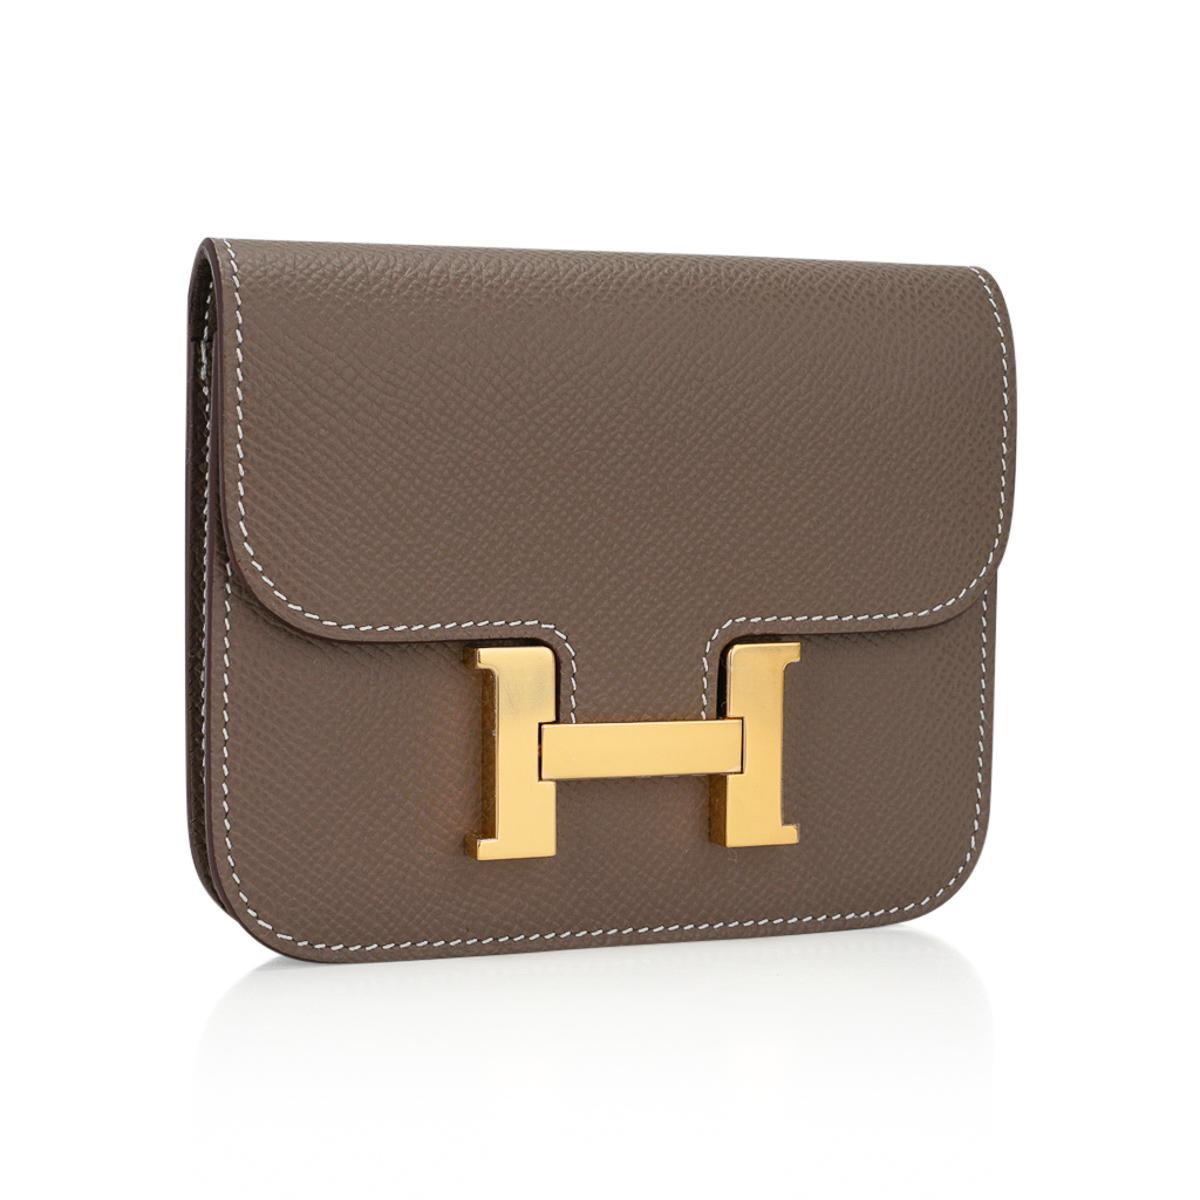 Mightychic offers an Hermes Constance Slim Wallet Belt bag featured in neutral Etoupe.
This Hermes wallet is stunning with coveted Gold hardware in Epsom leather.
Includes removable zipped change purse and 2 credit card slots.
Rear belt loop allows